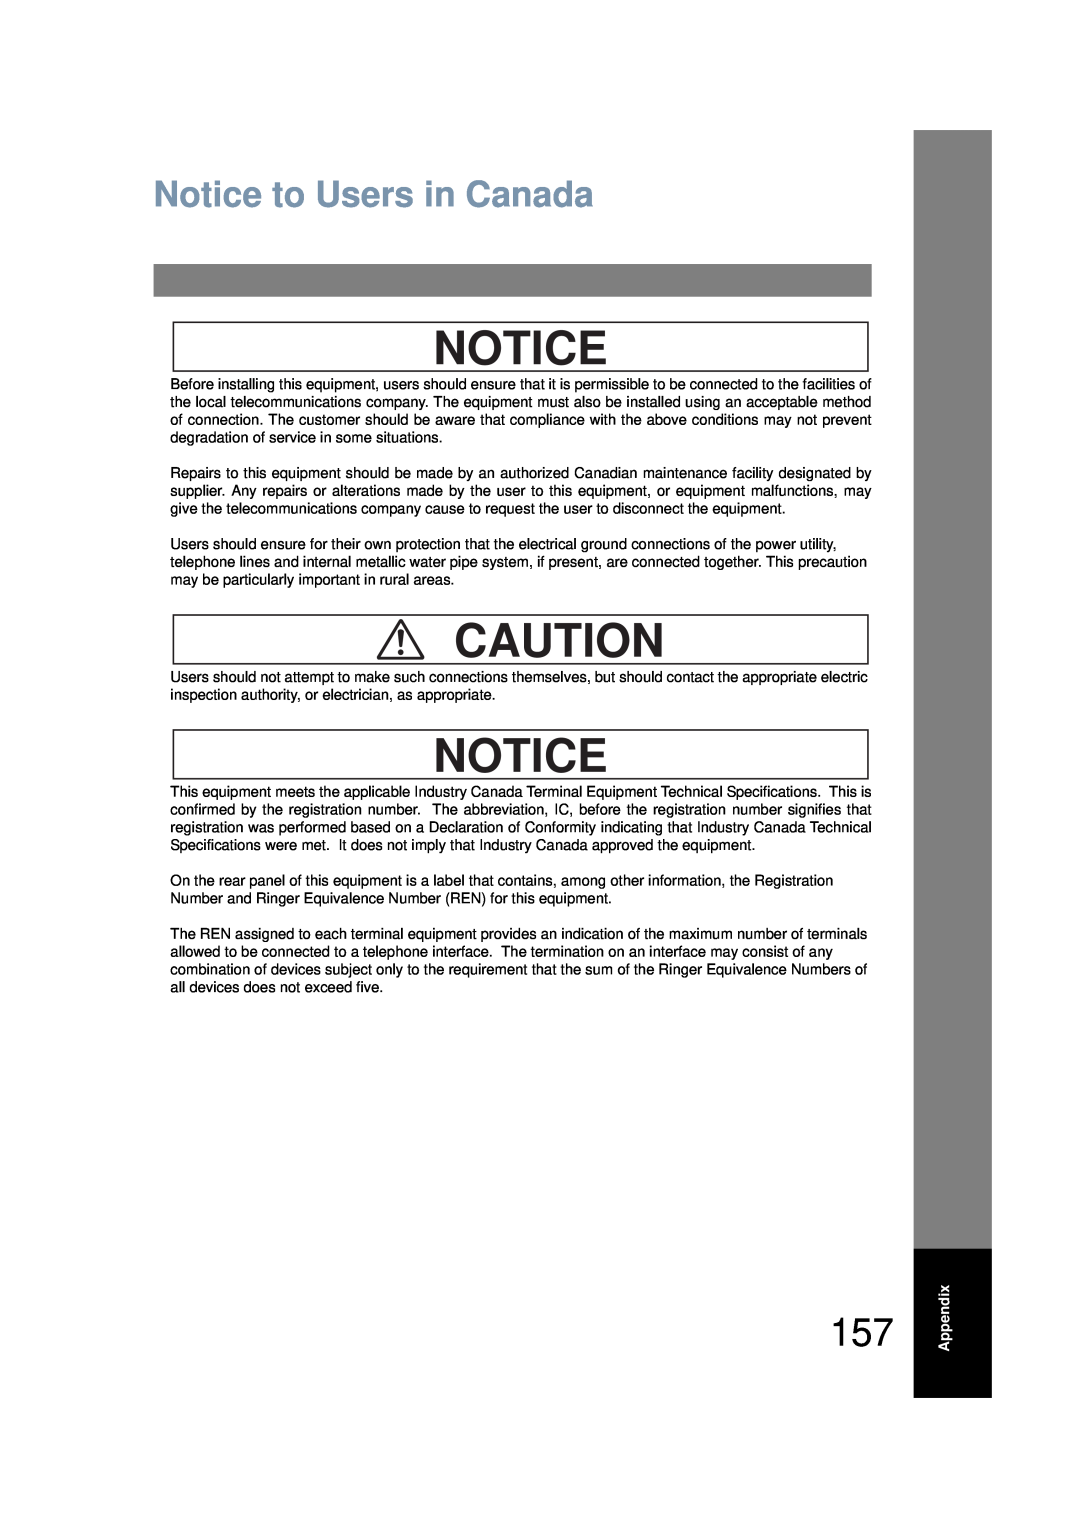 Panasonic UF-6200 operating instructions Notice to Users in Canada, Appendix 